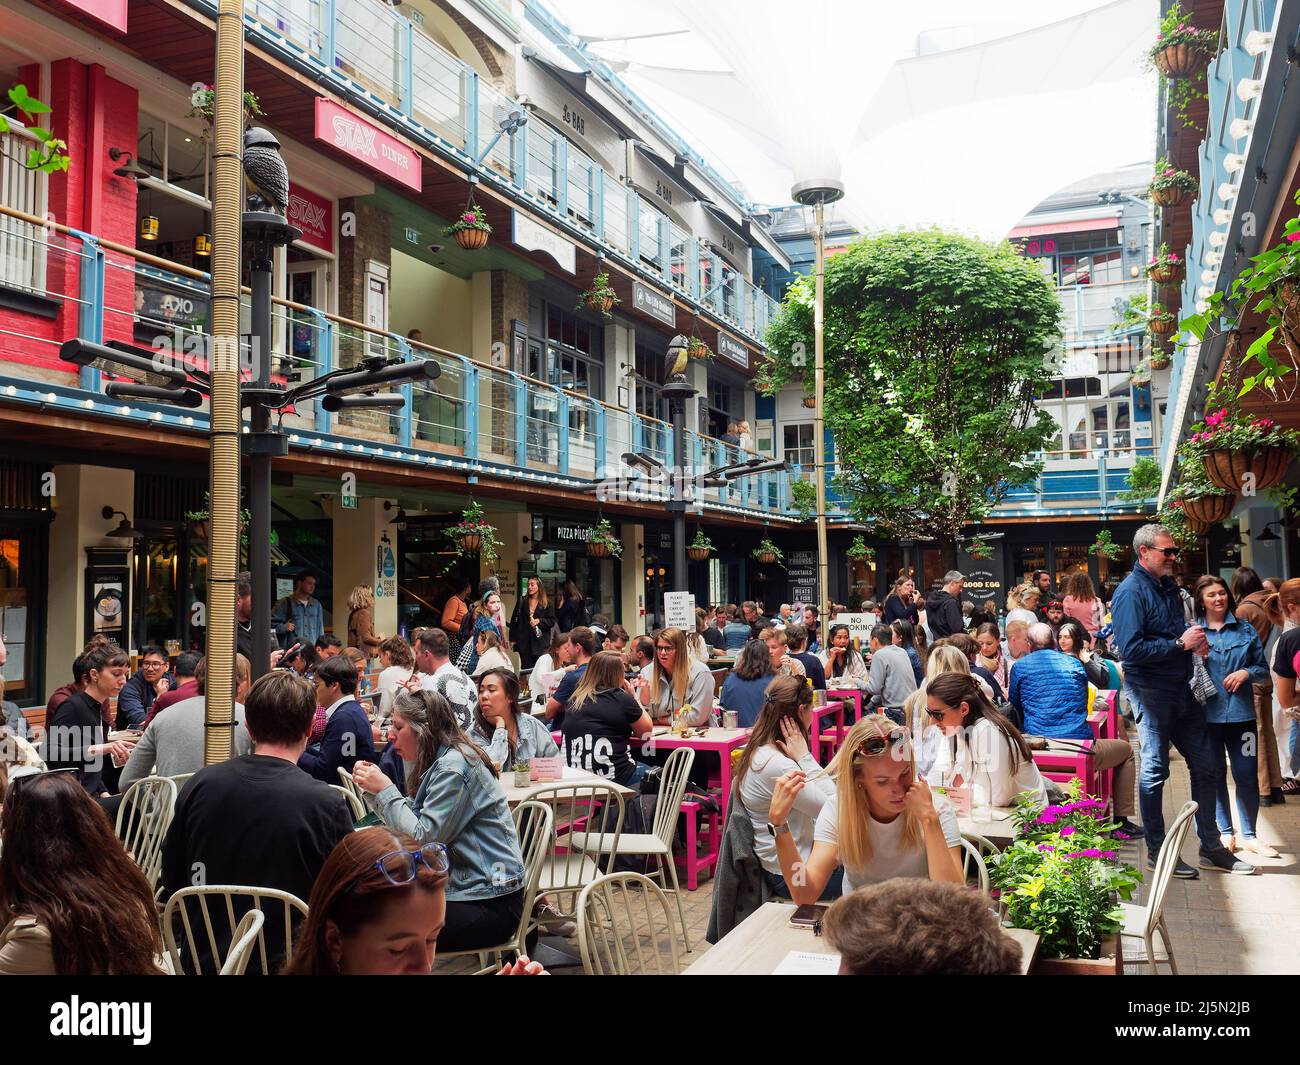 A view of people dining and enjoying food and drink in Kingly Court just off Carnaby Street in London UK Stock Photo